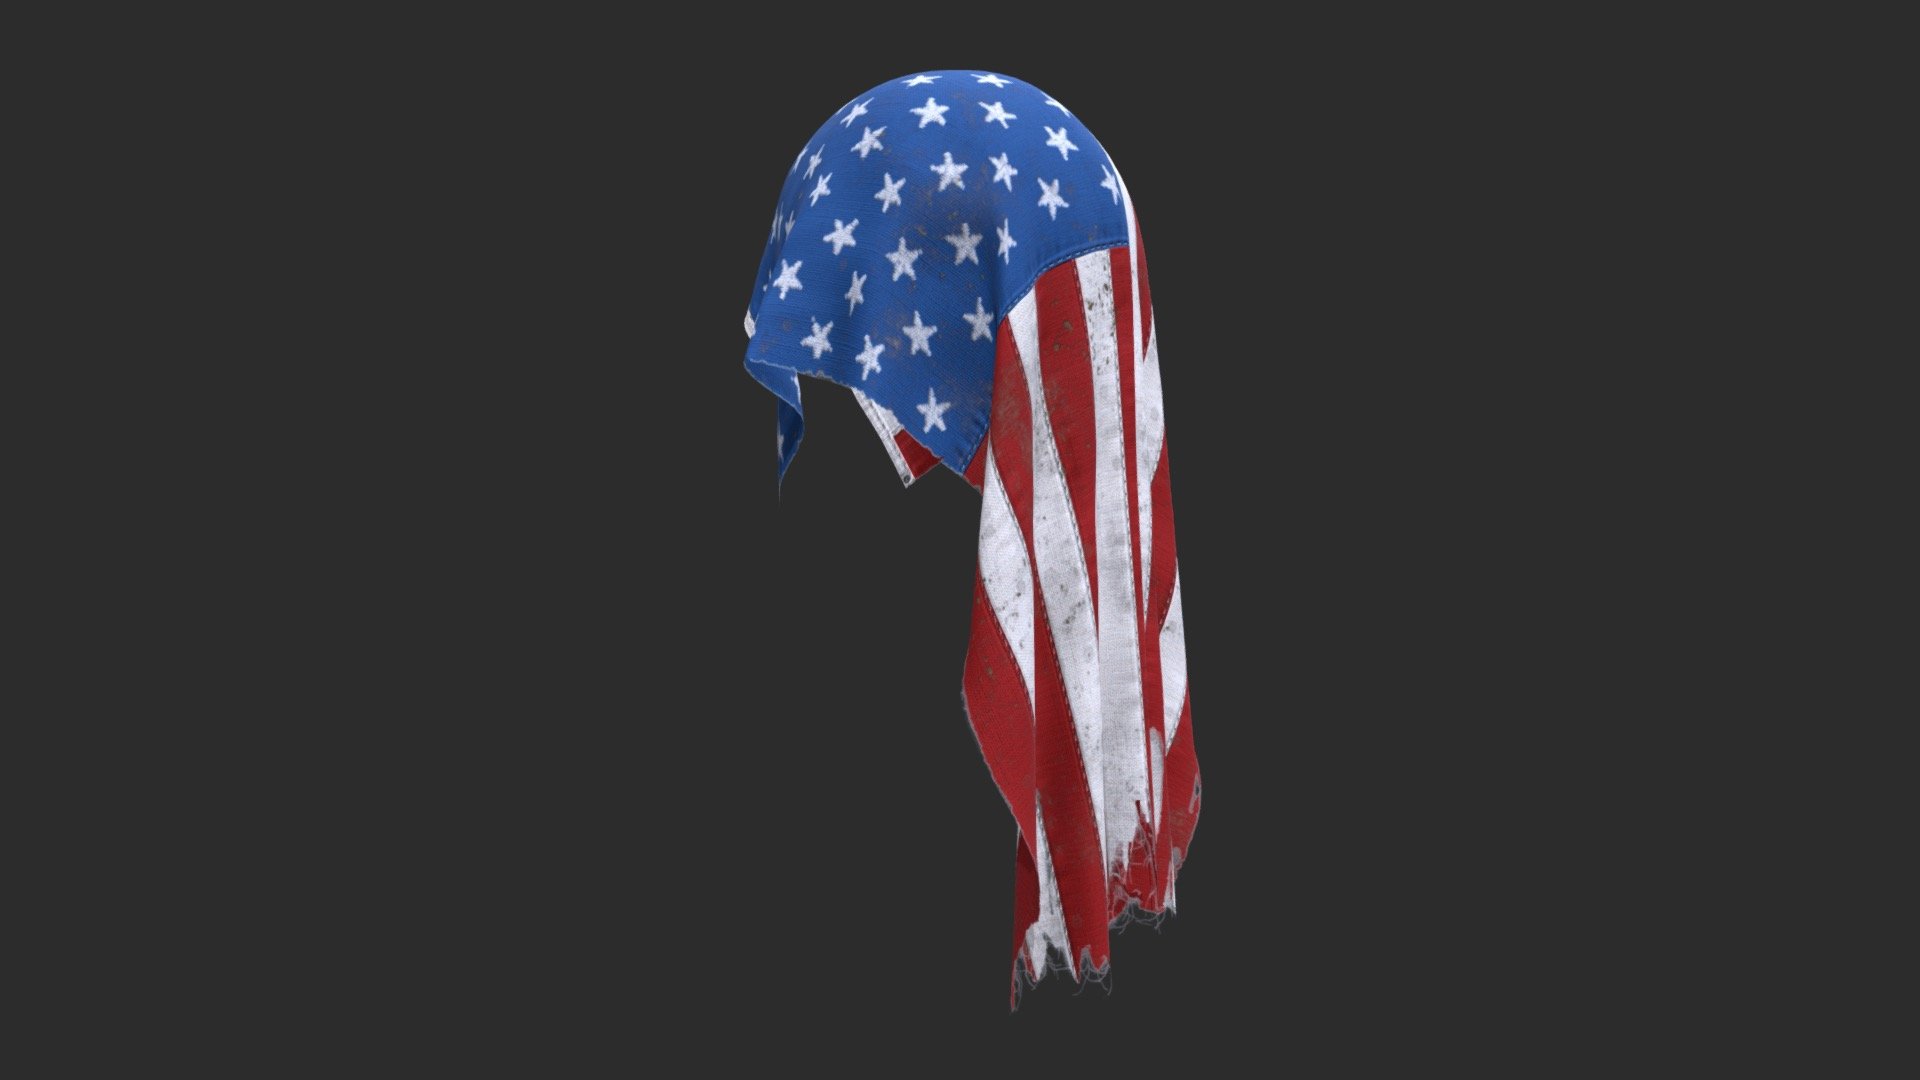 The 3D model of the American Flag (50 Stars) used from 1960 to today. The model includes 3 materials for clean version, dirty version and bloody version. All stars are in embroidery floss and many details as folds and wrinkles around all seams to get the most realistic fabric effect.

This flag represents the actual one used by USA.

The Textures Maps are in 2K and ready for PBR workflow.

This asset includes the Blender native file, an animated version in low-poly and some static pose variants. The textures includes 3 variants of the Flag : Clean, Dirty and Bloody.

ANIMATED ASSET




Objects : 1

Polygons : 36

Materials : 3

LODs : No

ANIMATIONS




Rigged : Yes (including armature and bones, no physics animations)

Actions : 2 (Simple in 138 frames - Natural in 575 frames)

Loop : Yes



STATIC ASSETS




Objects : 5

Polygons : 144 or 576

Materials : 3 (sames as the animated version)

LODs : Yes

Number of LODs : 2

 - US Flag 50 Stars 1960-Today - Buy Royalty Free 3D model by KangaroOz 3D (@KangaroOz-3D) 3d model